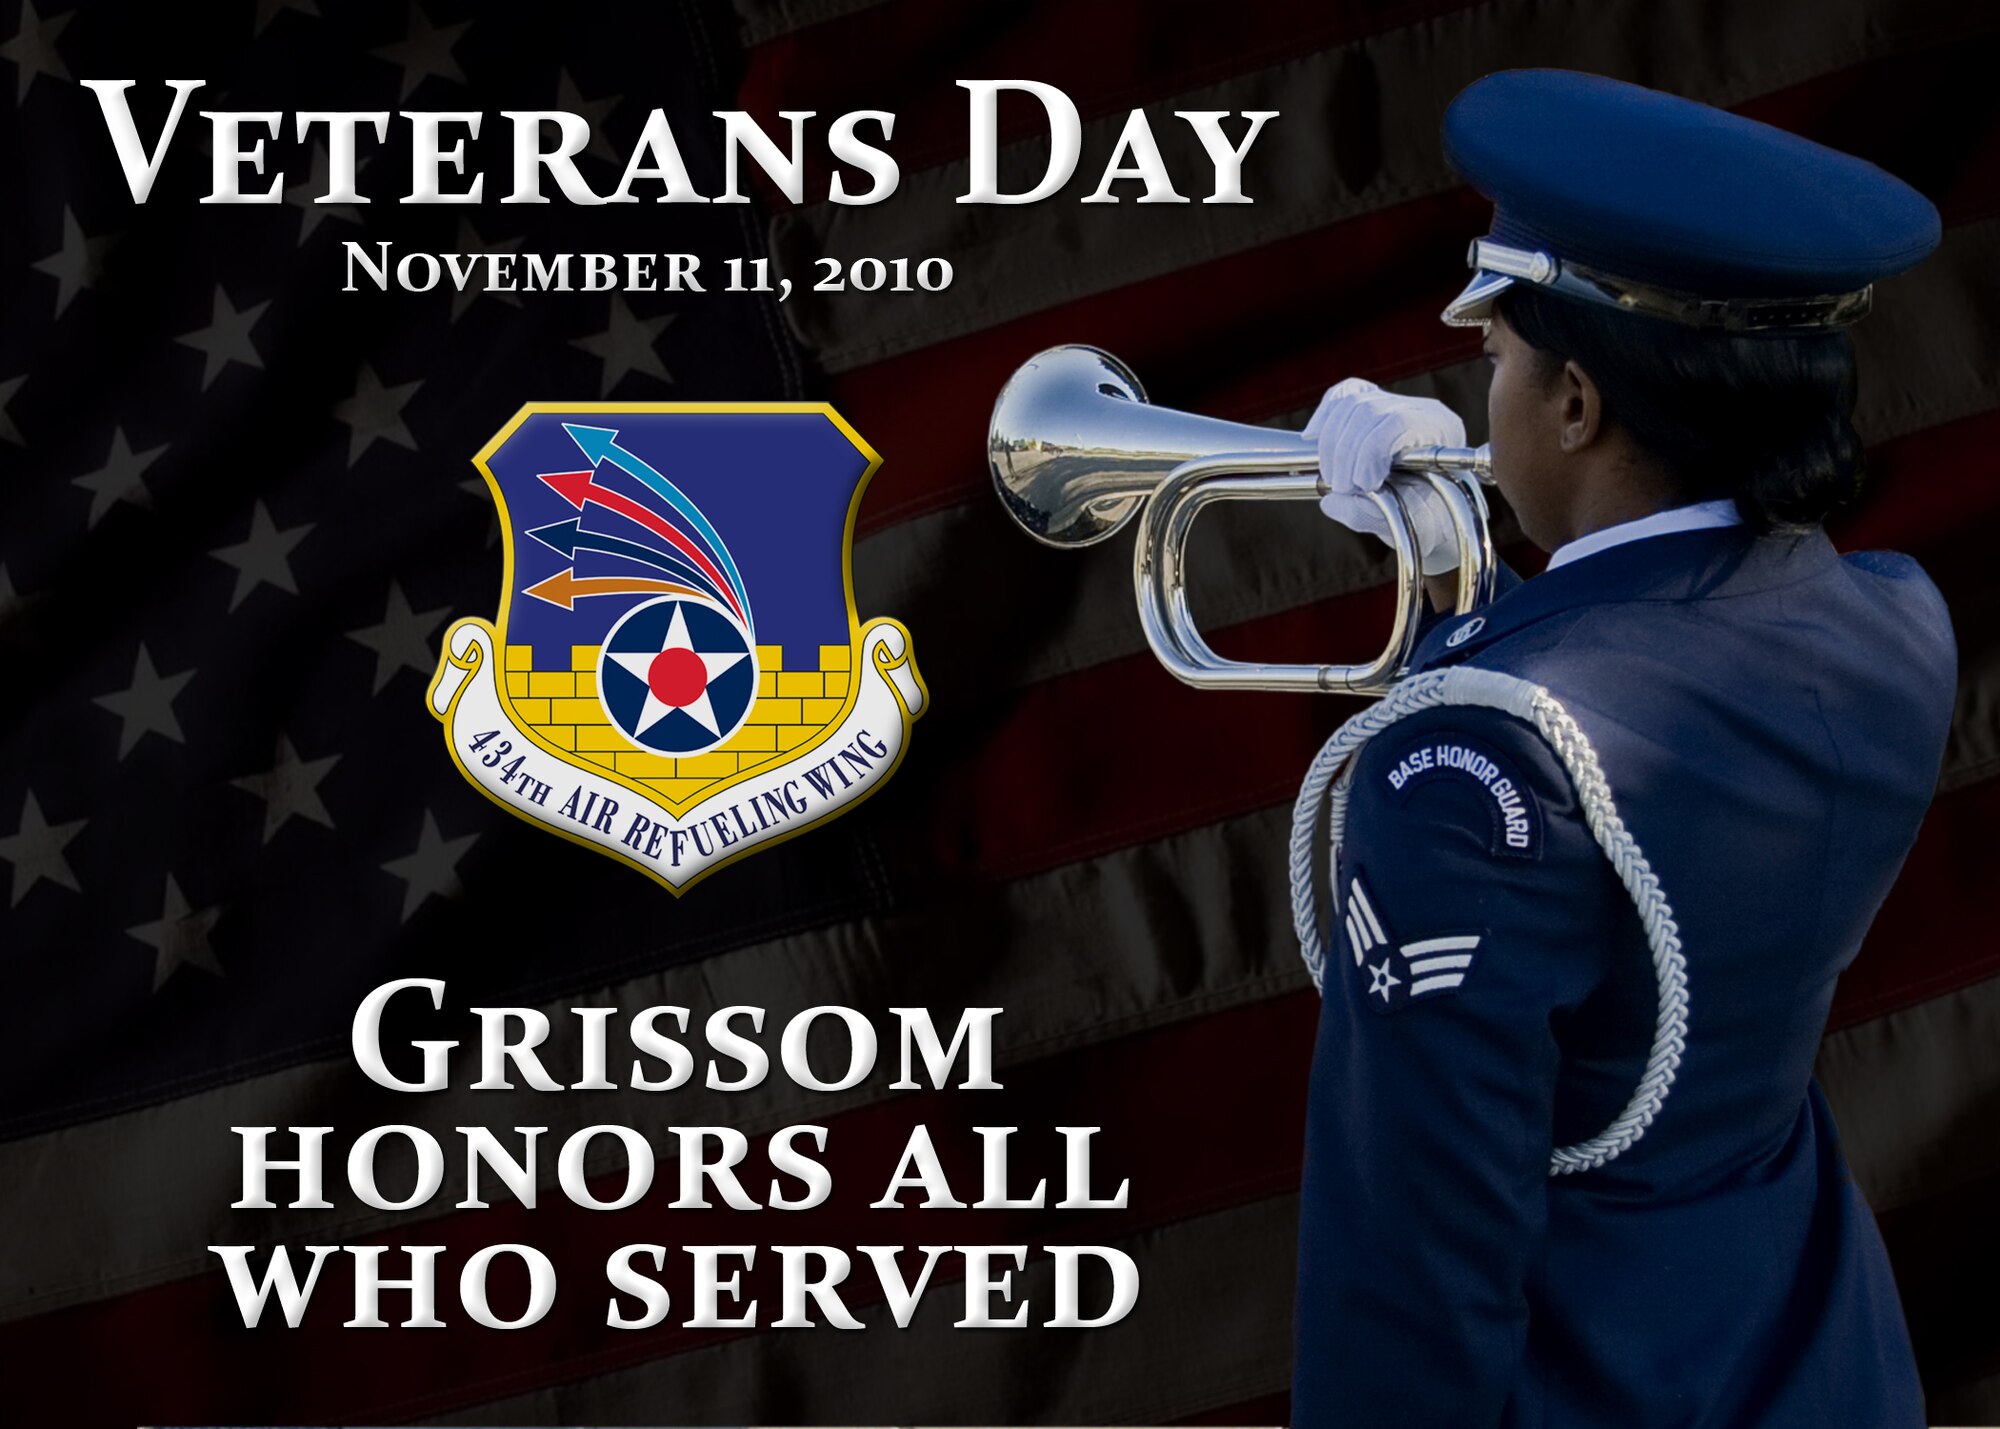 GRISSOM AIR RESERVE BASE, Ind. -- Members of the 434th Air Refueling Wing and Grissom Air Reserve Base honor all who have served during Veterans Day. The holiday is a day to honor America's veterans for their patriotism, love of country and willingness to serve and sacrifice for the common good. (U.S. Air Force graphic/Tech. Sgt. Mark R. W. Orders-Woempner)